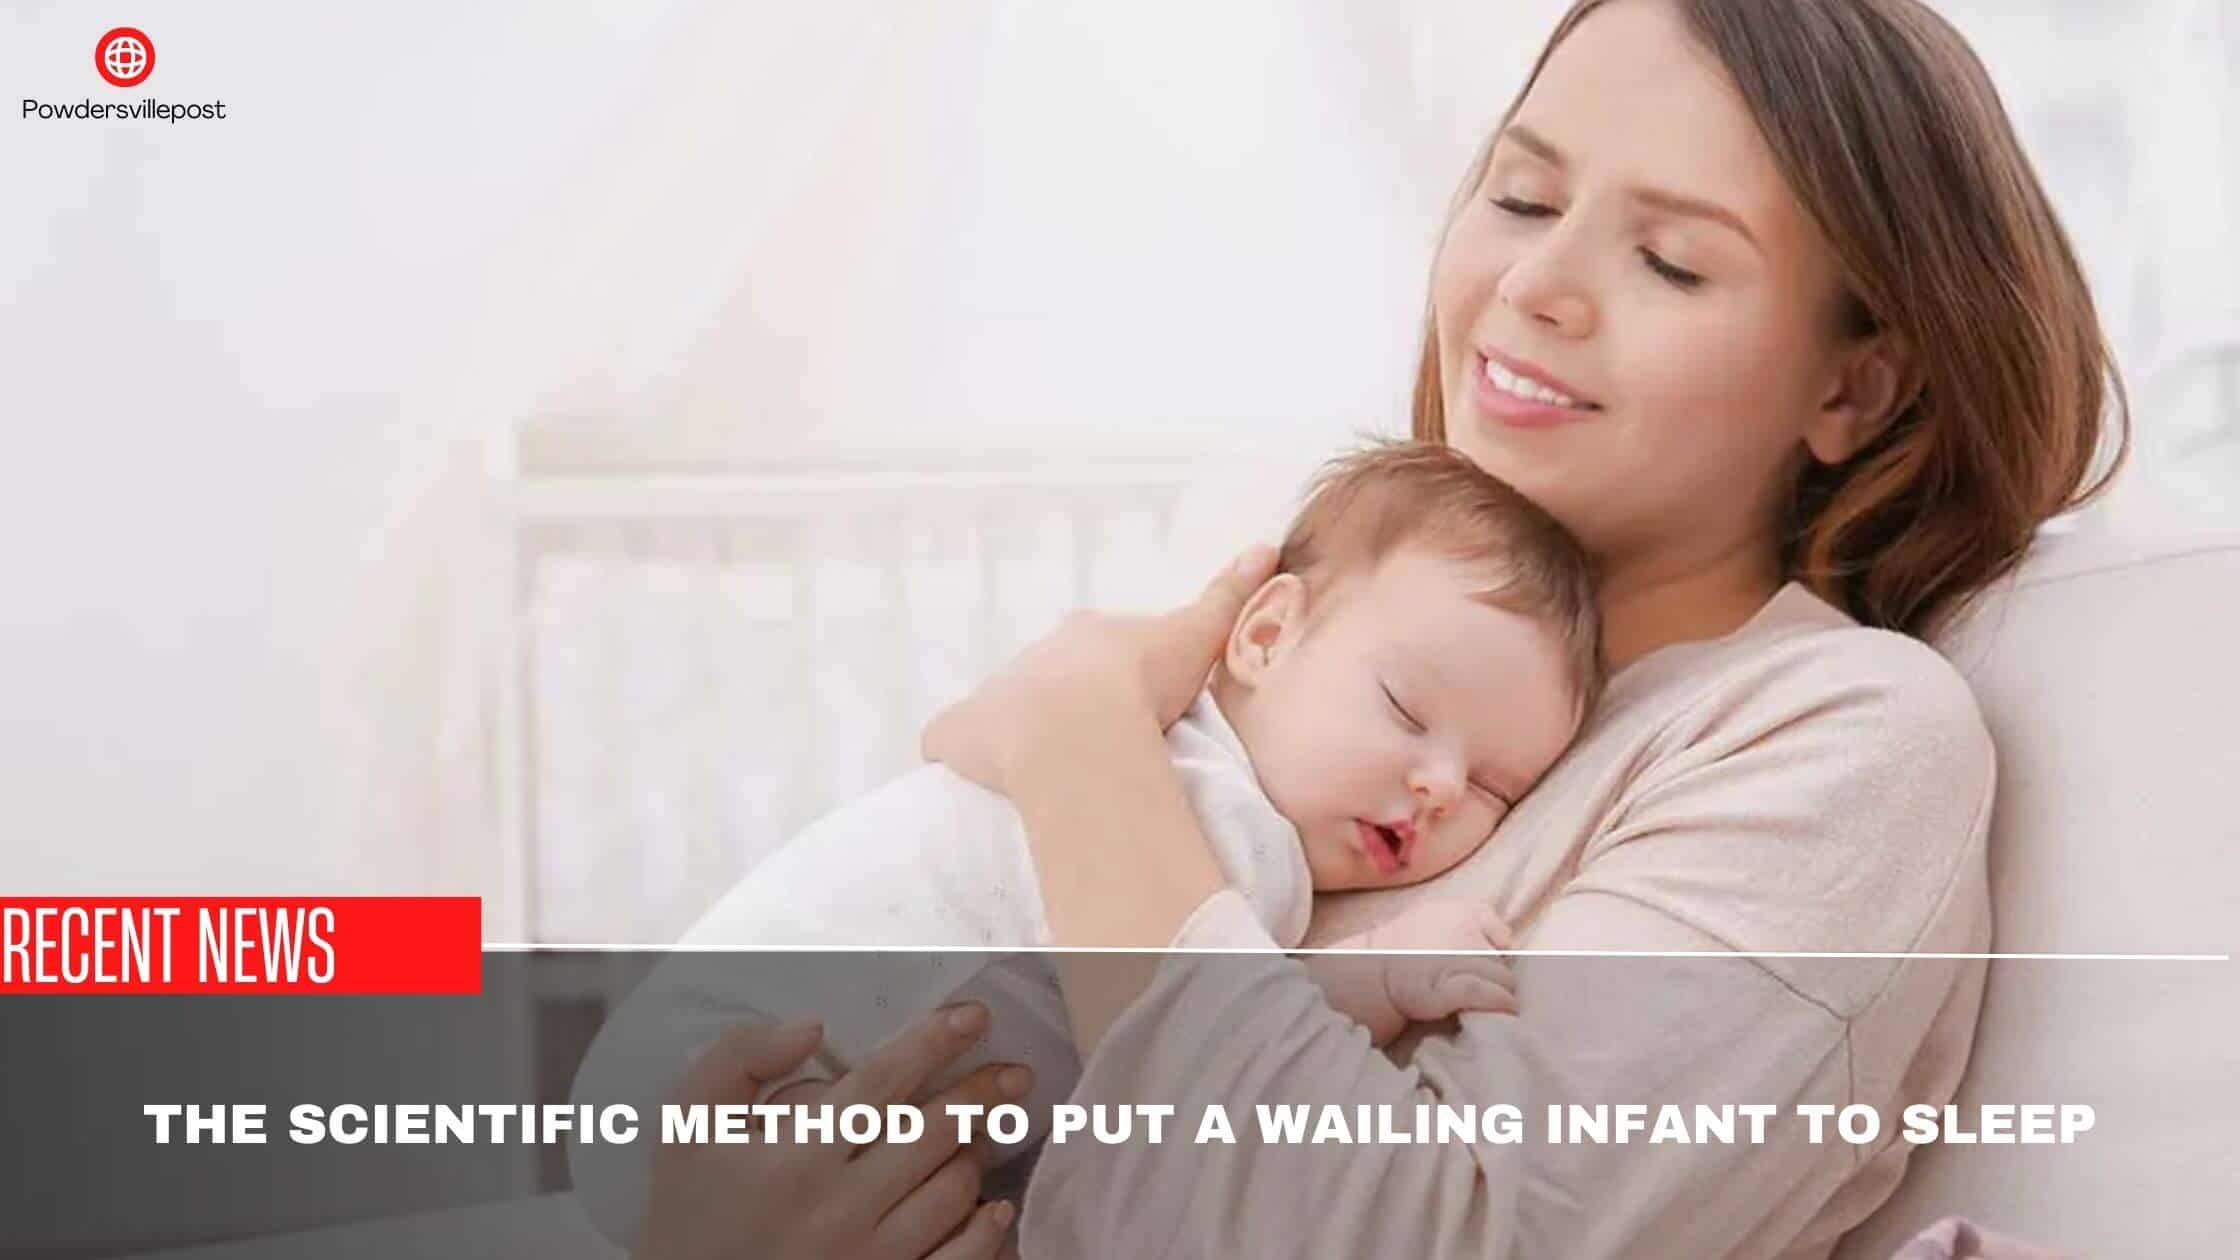 The Scientific Method To Put A Wailing Infant To Sleep